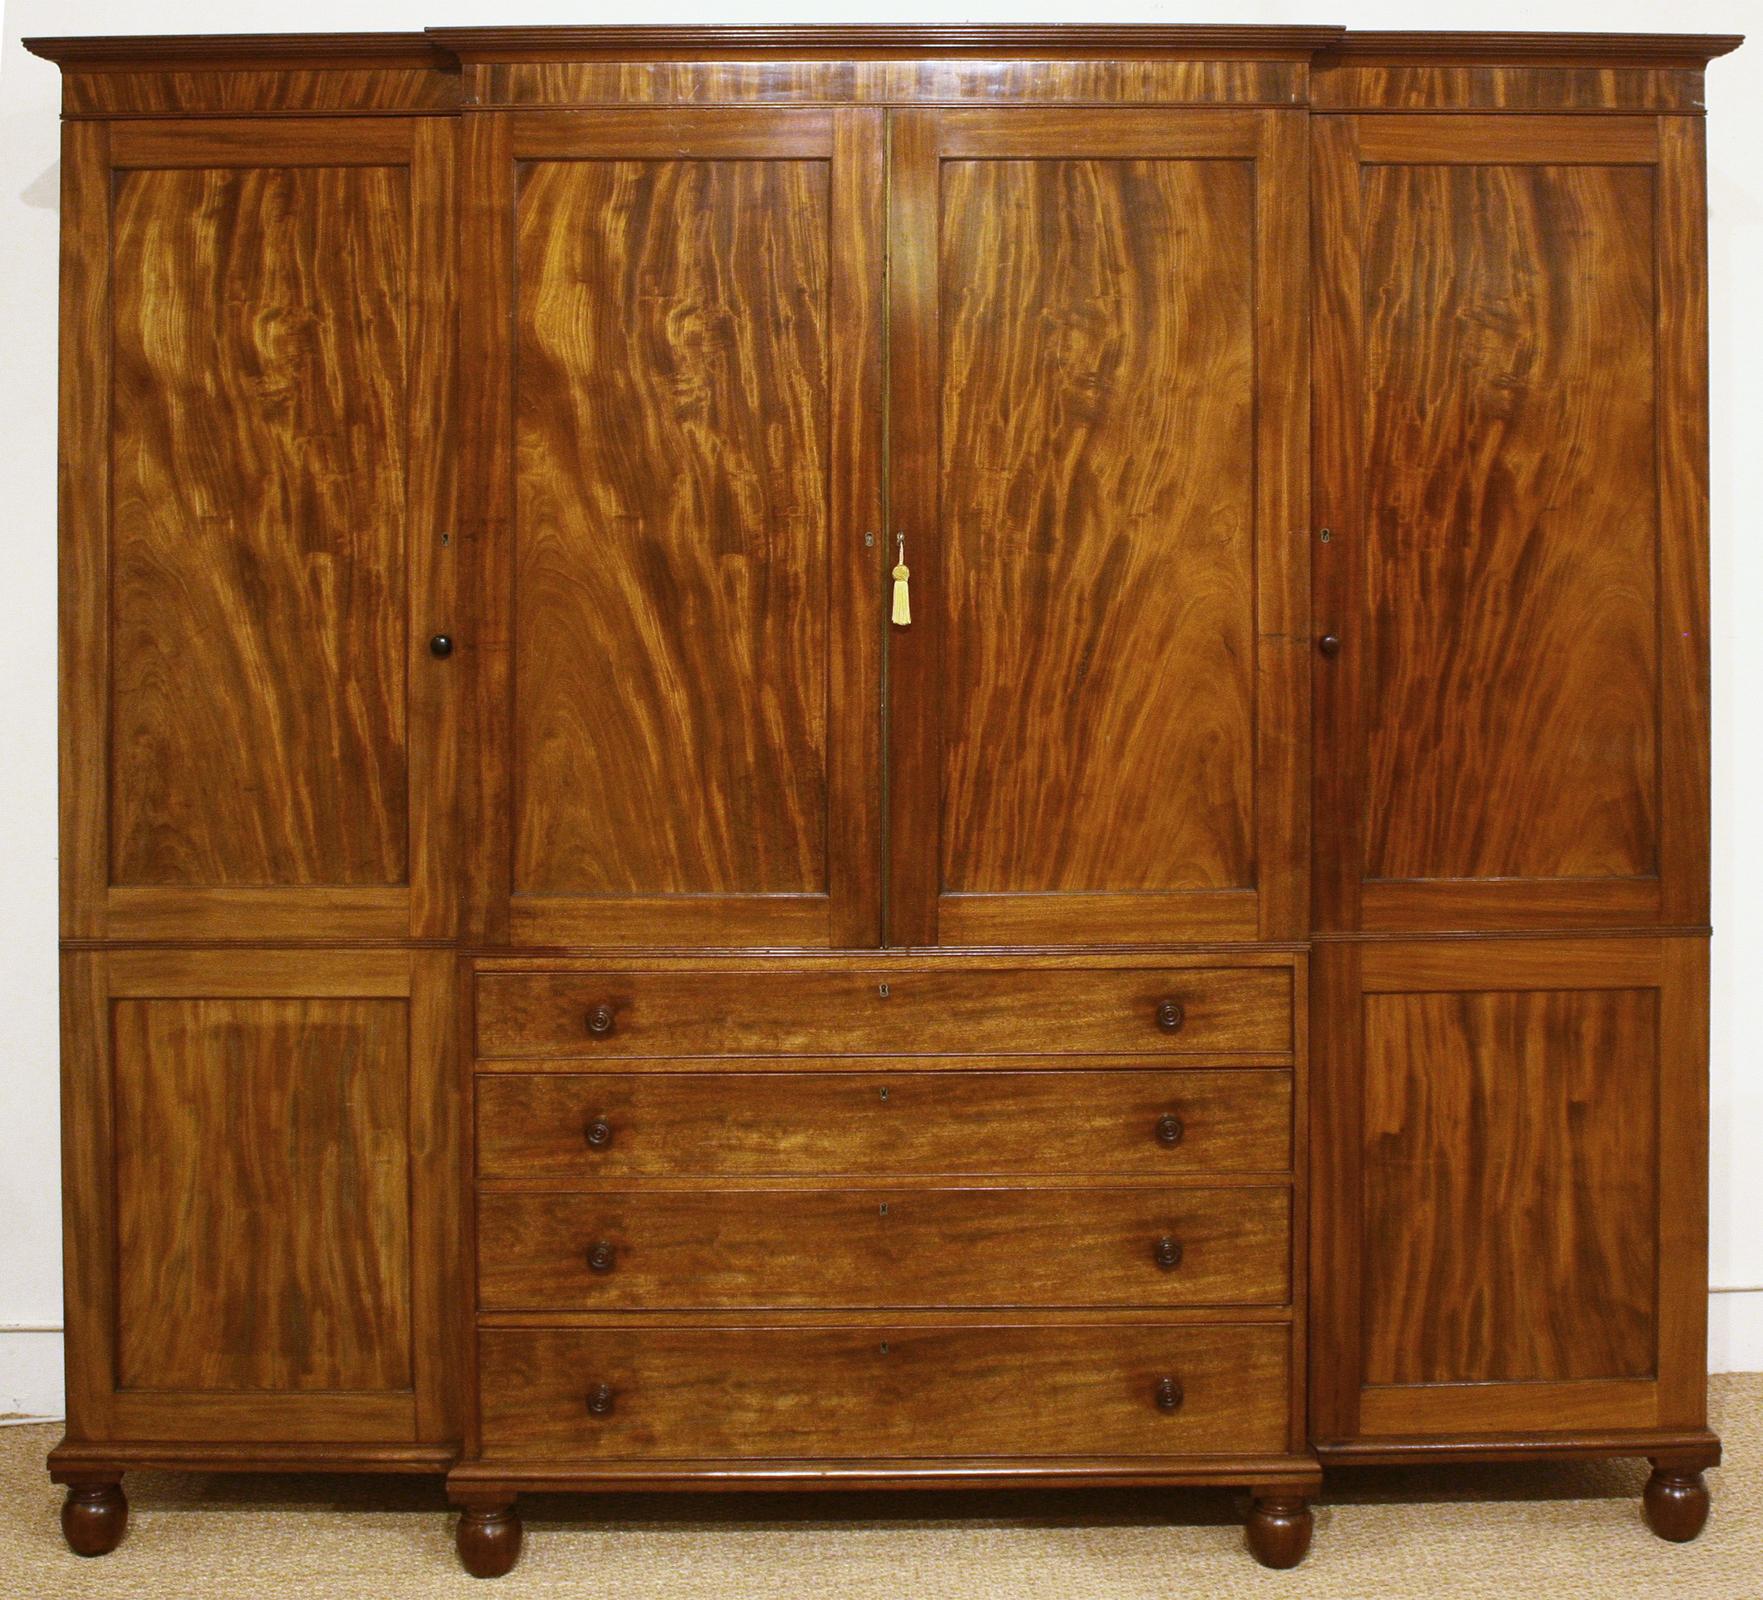 A stunning quality Georgian Revival breakfront mahogany gentleman’s wardrobe/press. The cornice has a broken pediment with a carved laurel wreath in center and two inlaid garland motifs. The central twin doors open to reveal five oak dressing trays